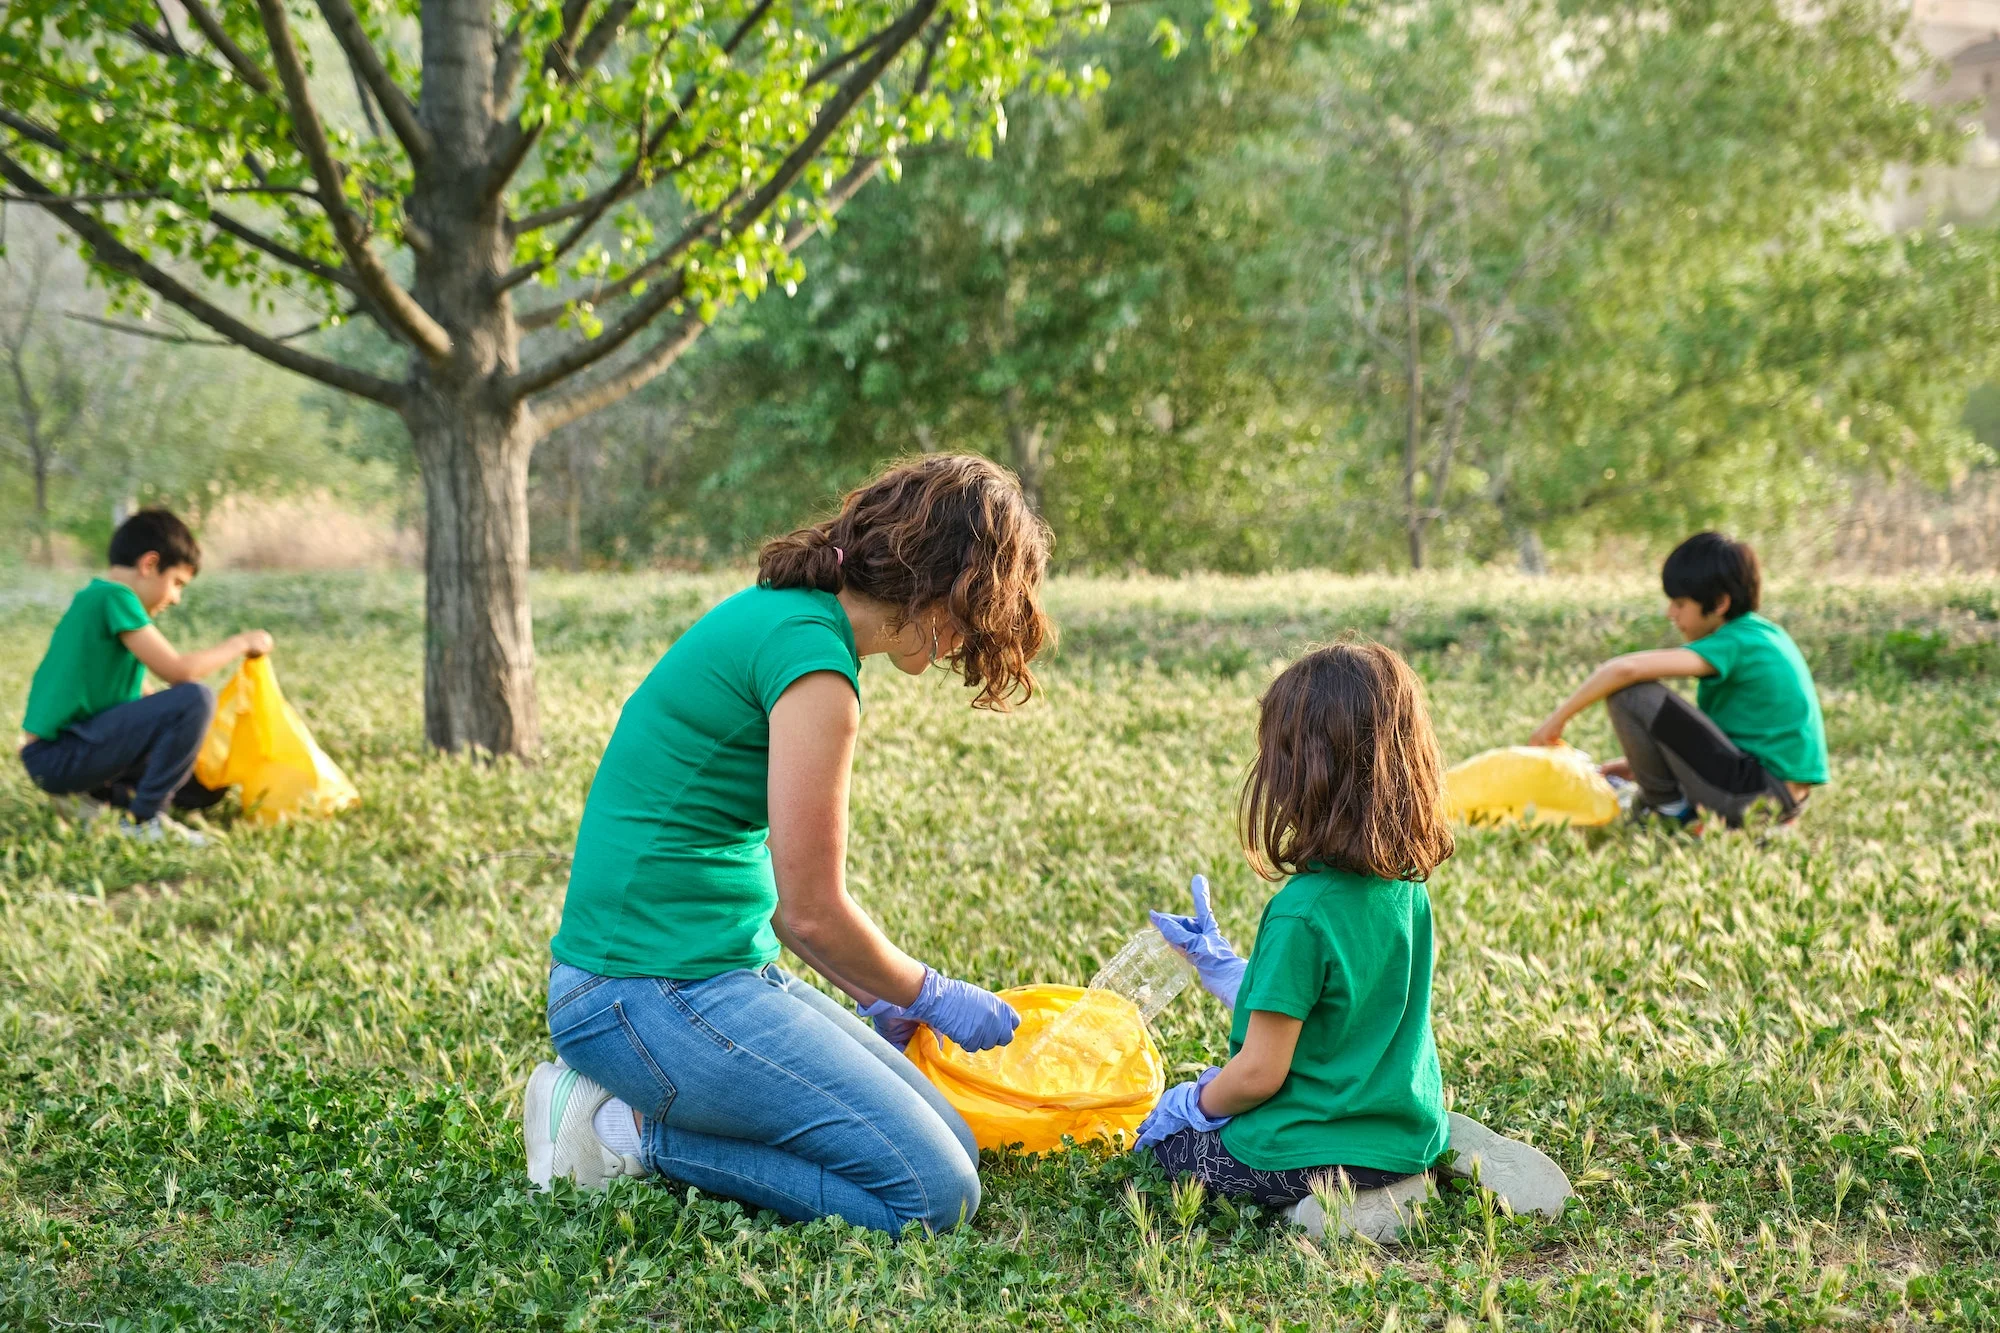 family in a green area with grass and trees collecting garbage and plastic from the countryside